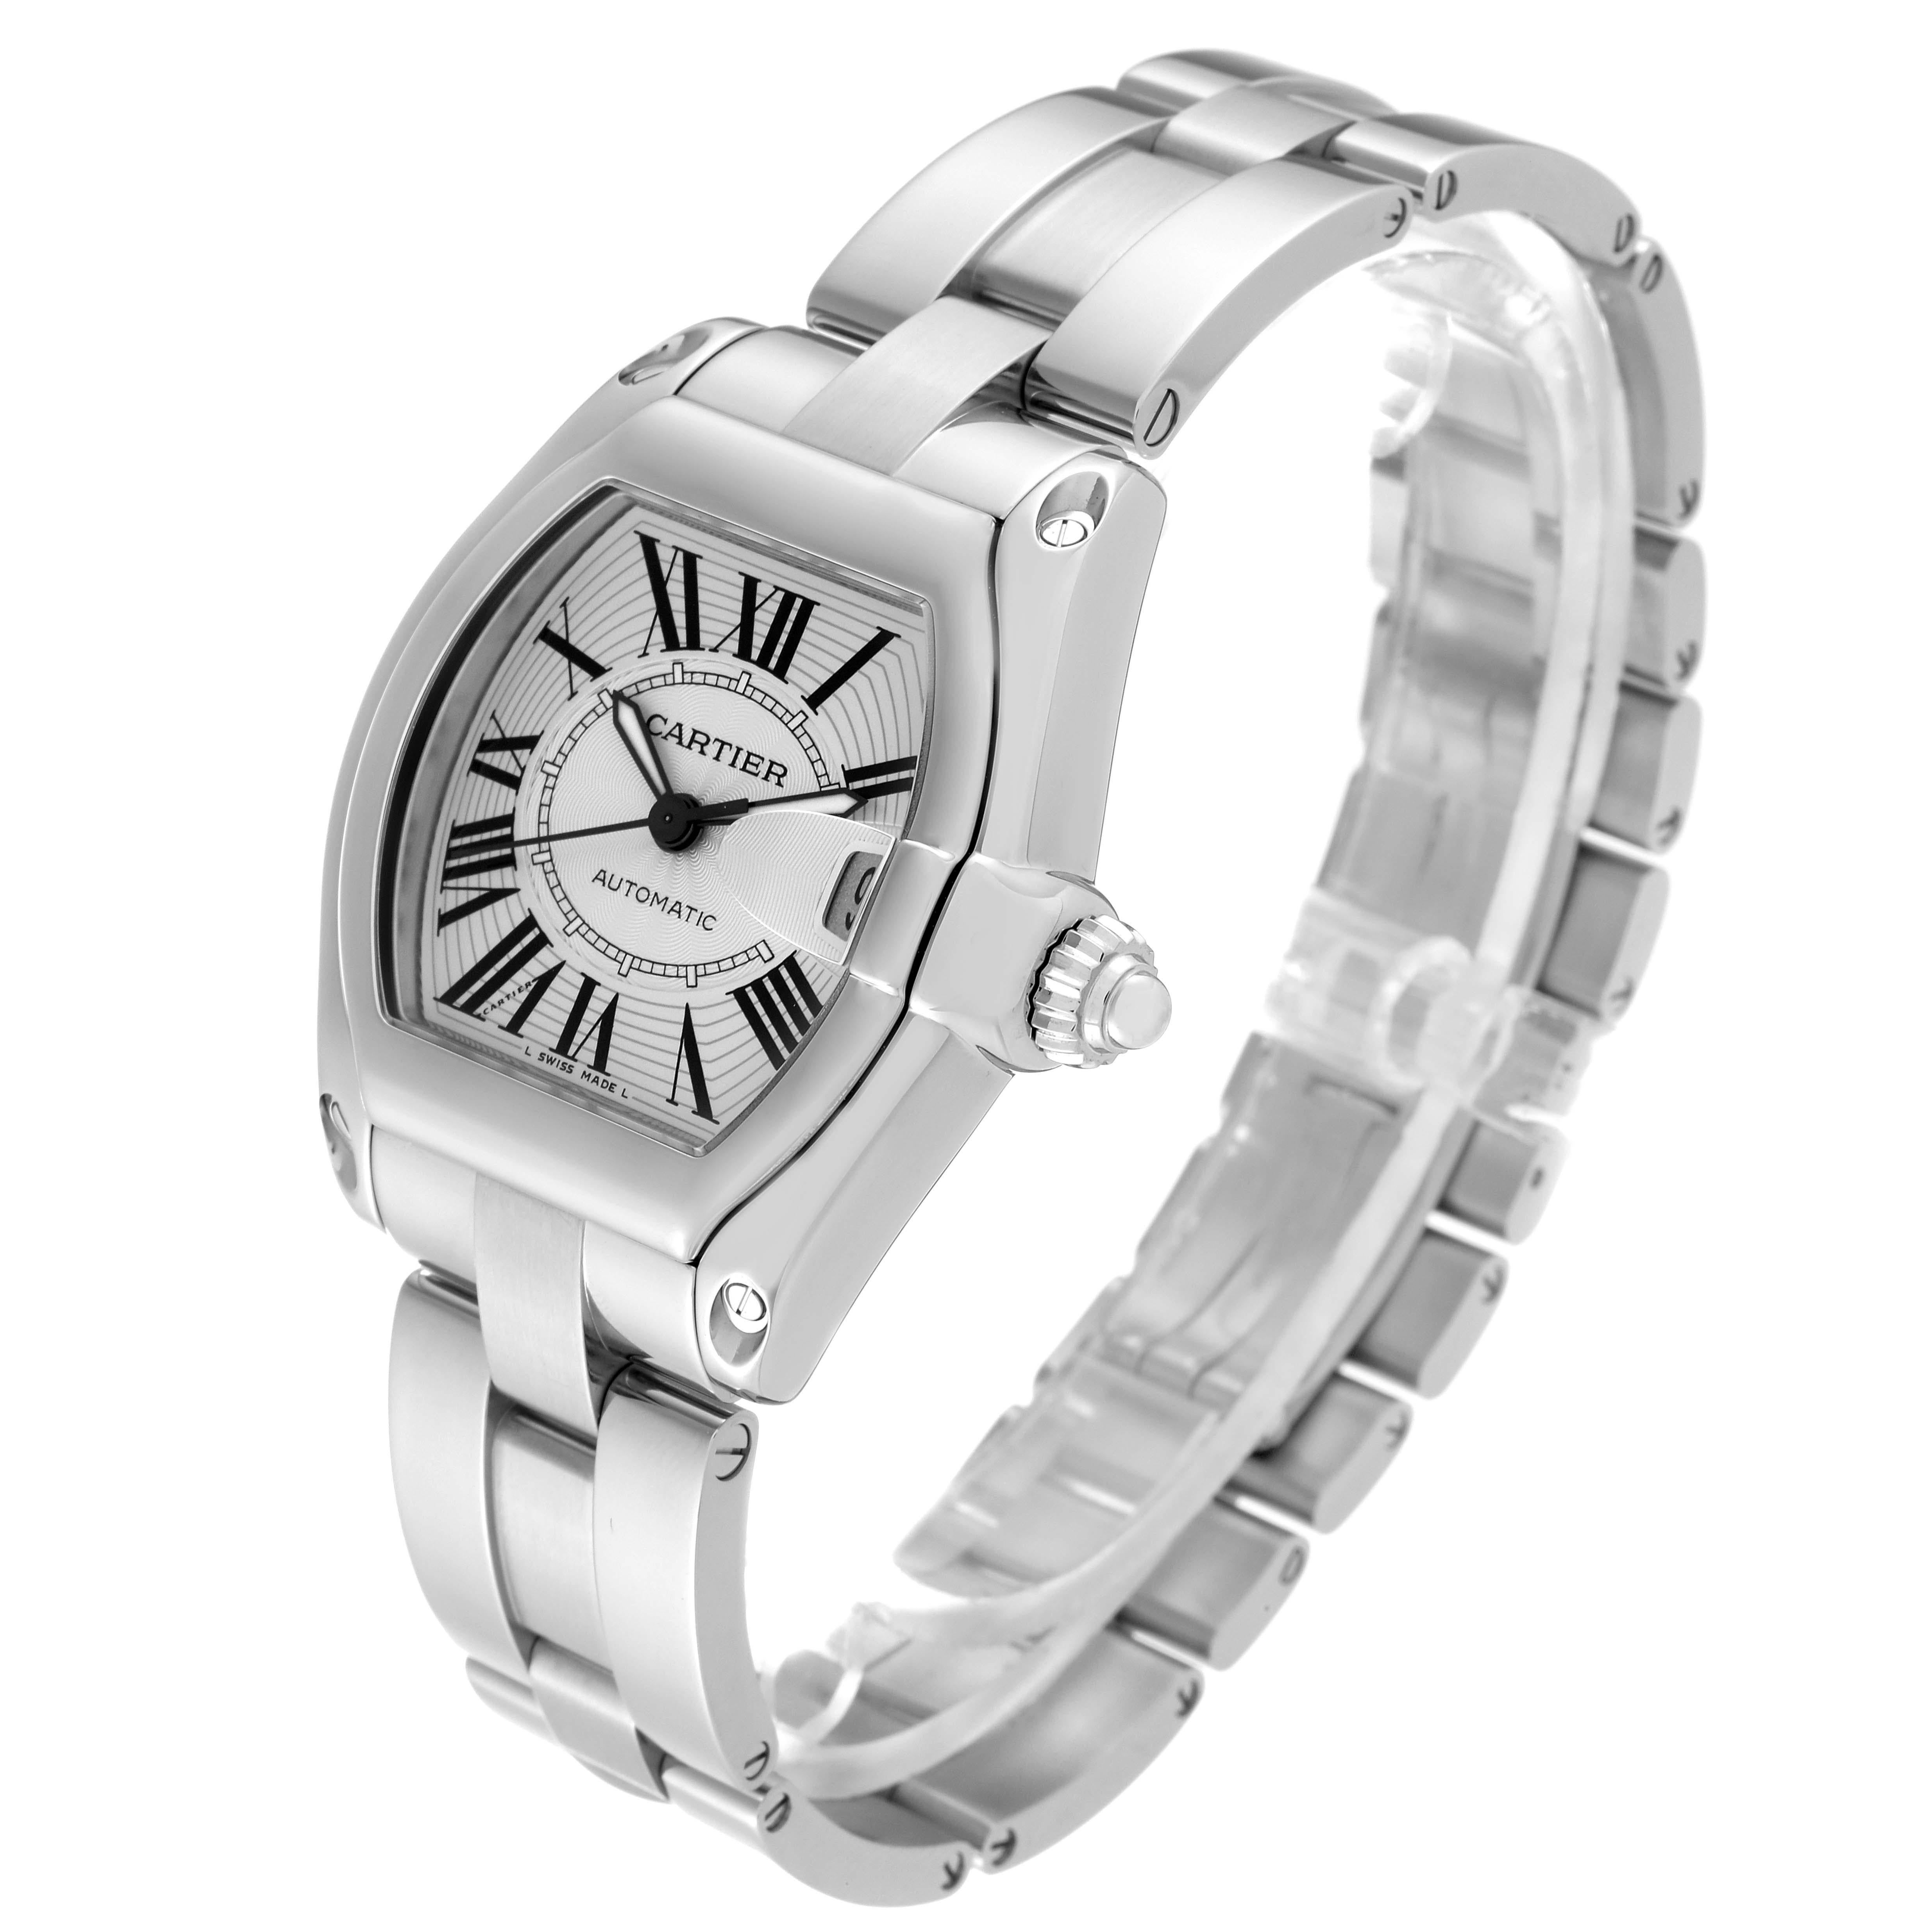 Cartier Roadster Silver Dial Steel Mens Watch W62000V3 Box Papers 5